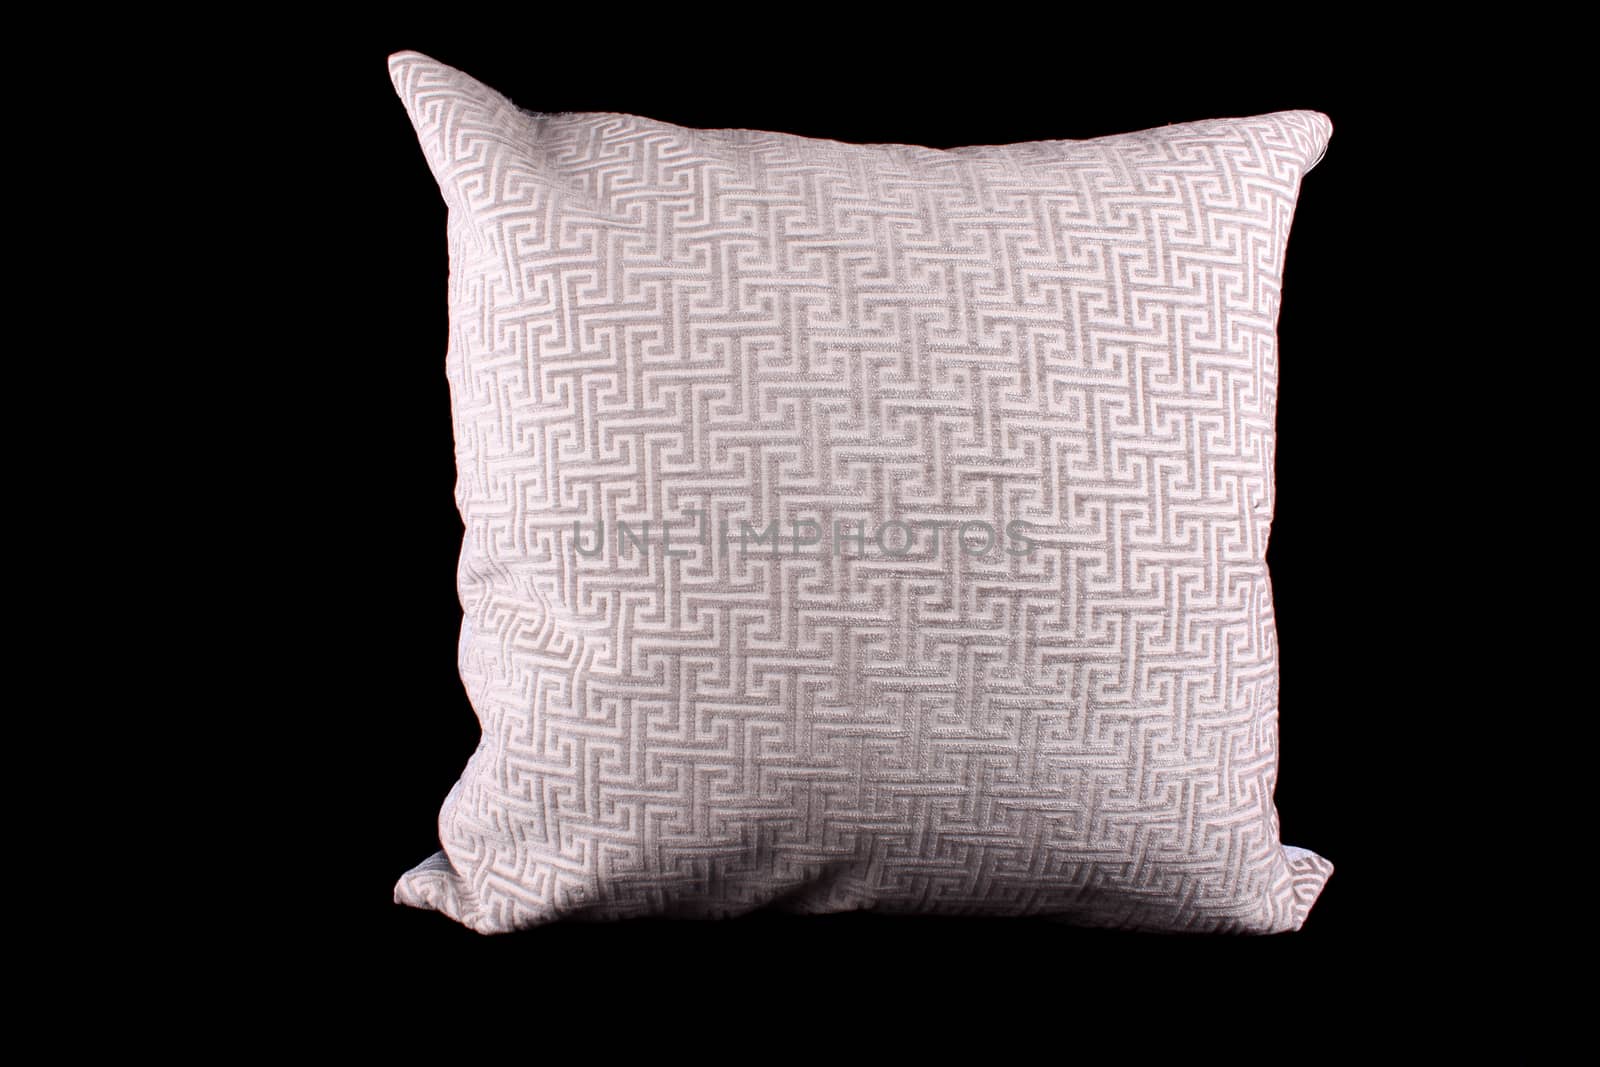 A white square shaped pillow with a beautiful designed white fabric cover.